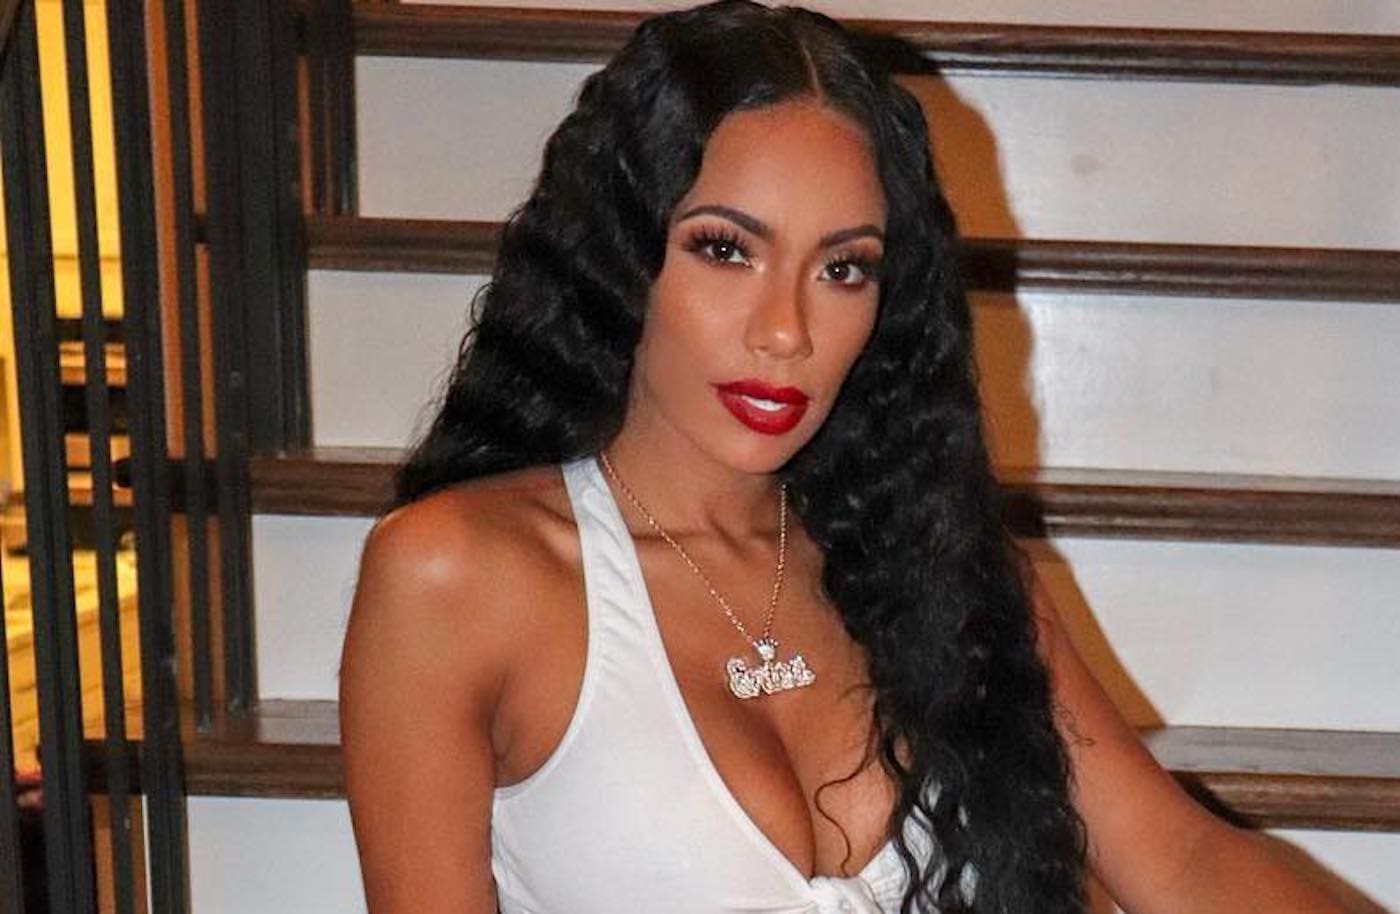 Erica Mena Sparks Pregnancy Rumors - See The Recent Photo With Safaree